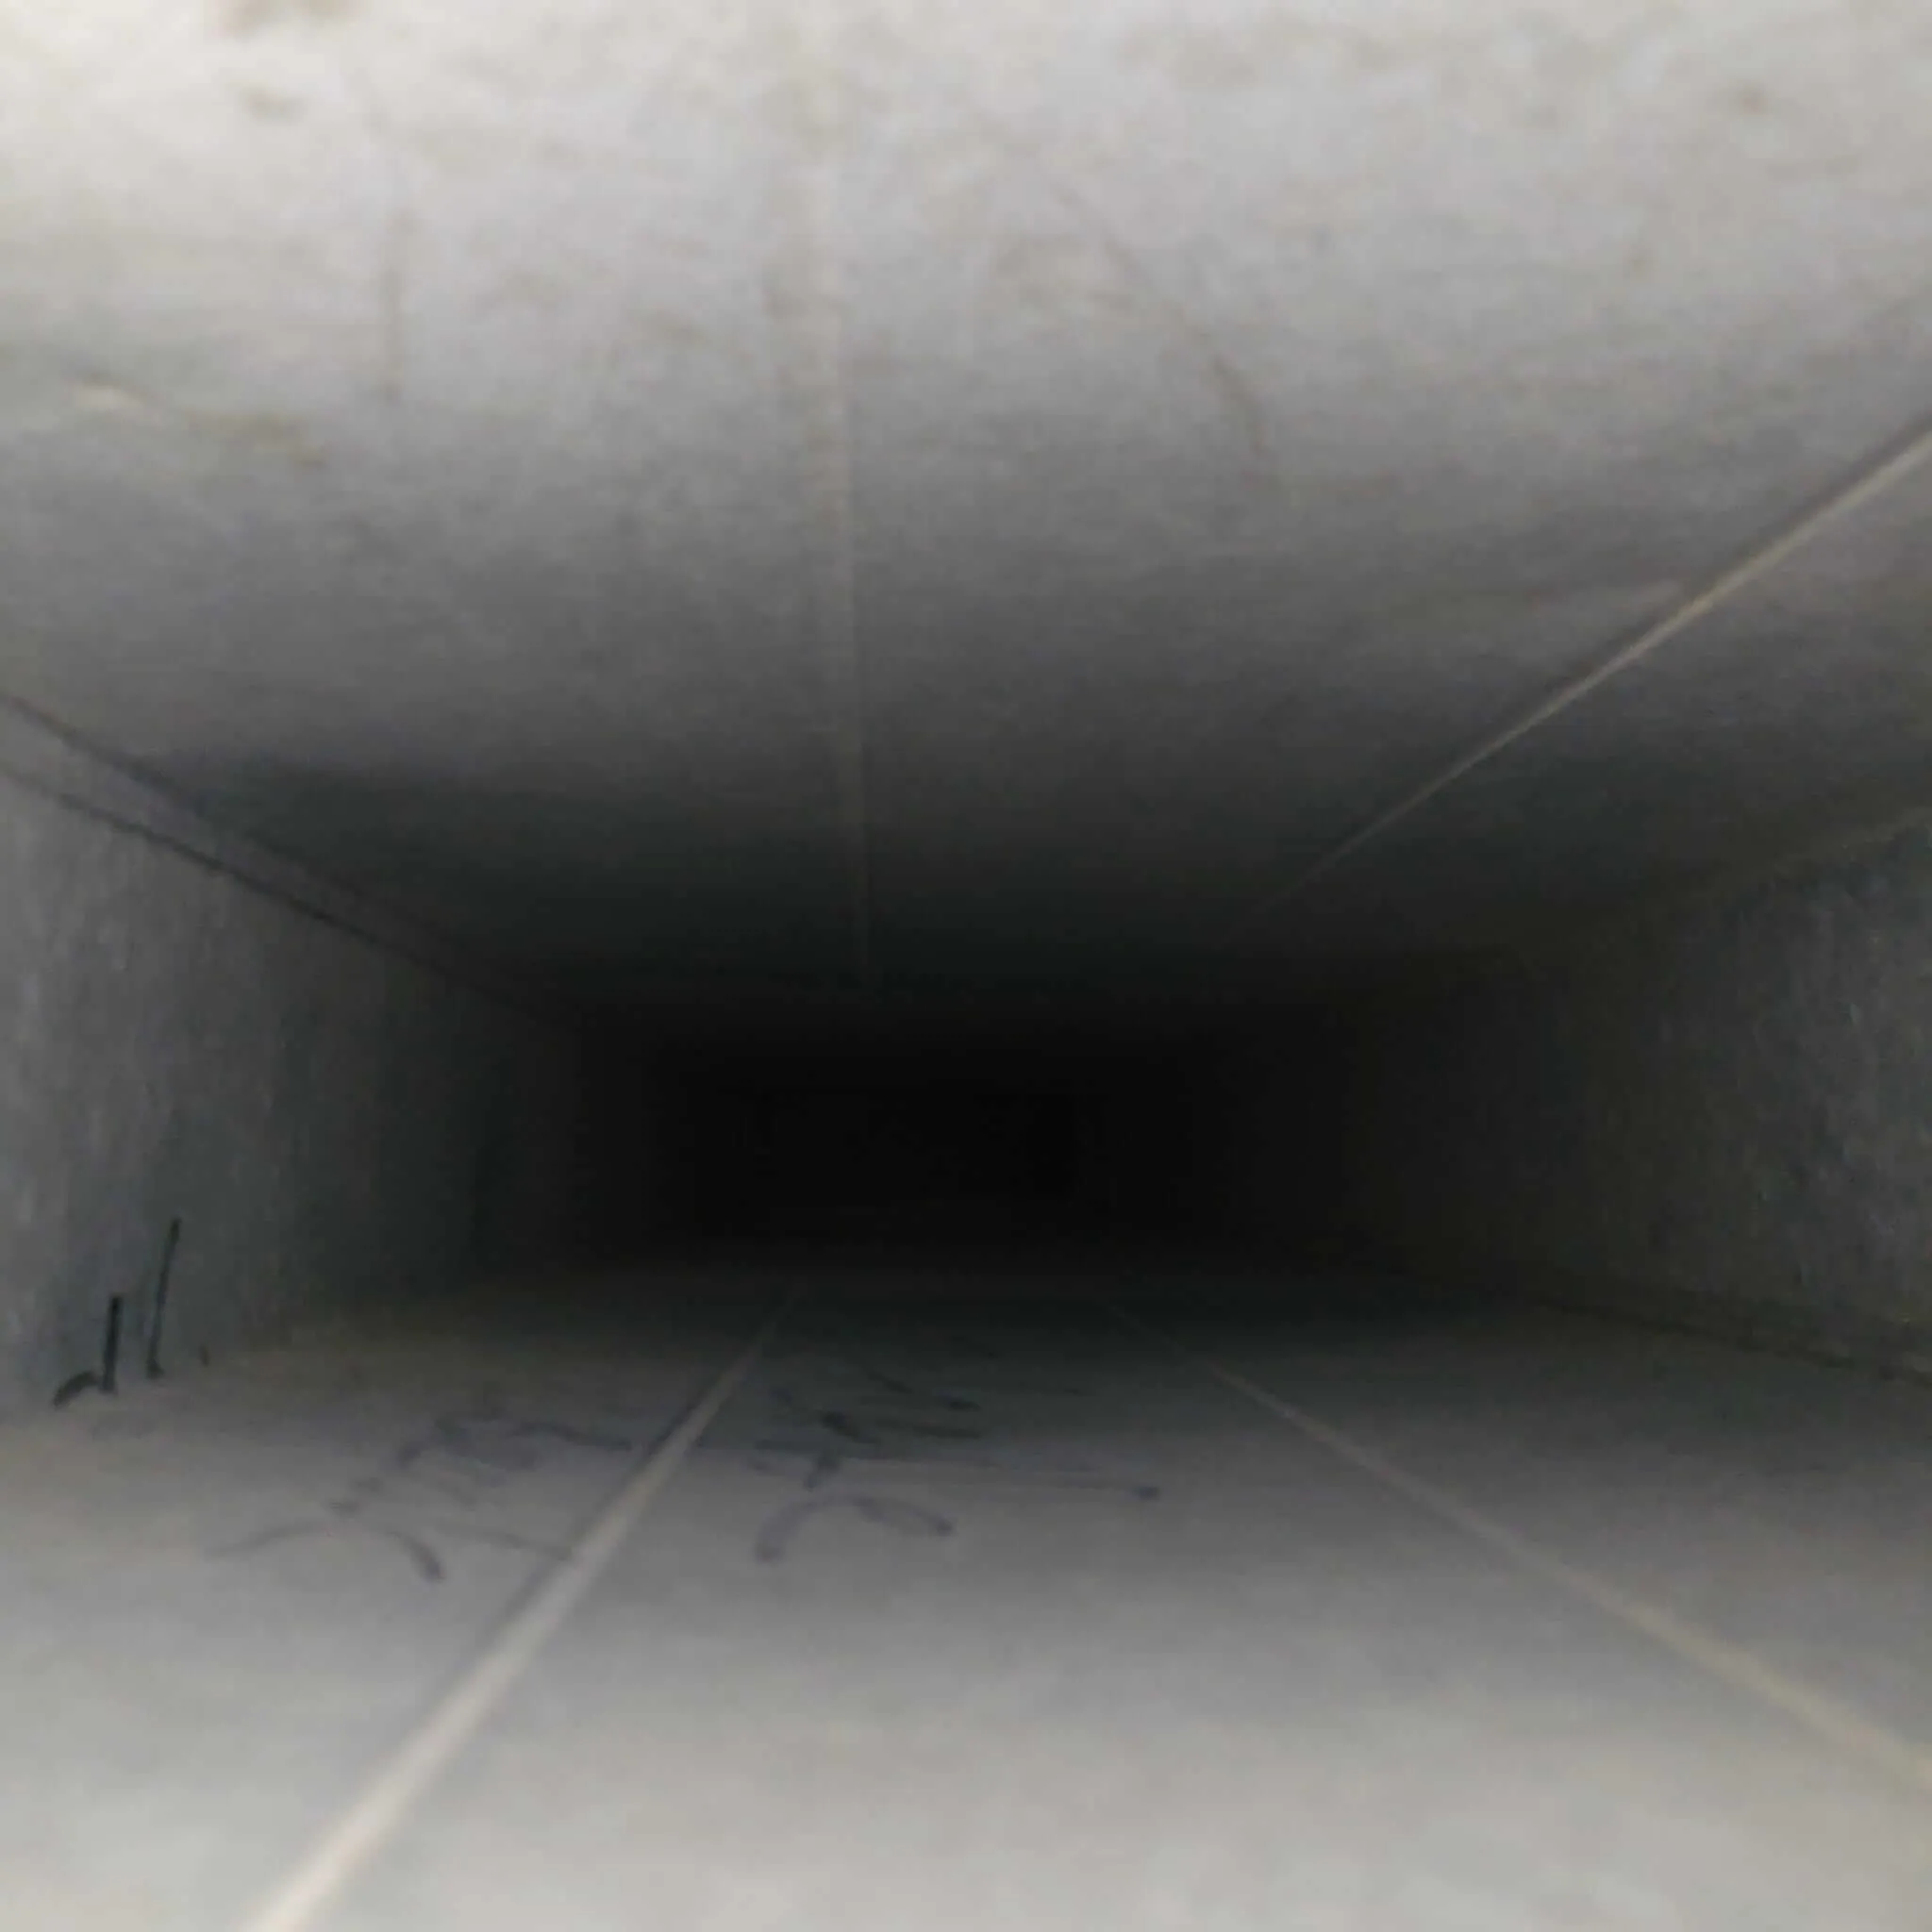 A clean air duct that has been properly serviced